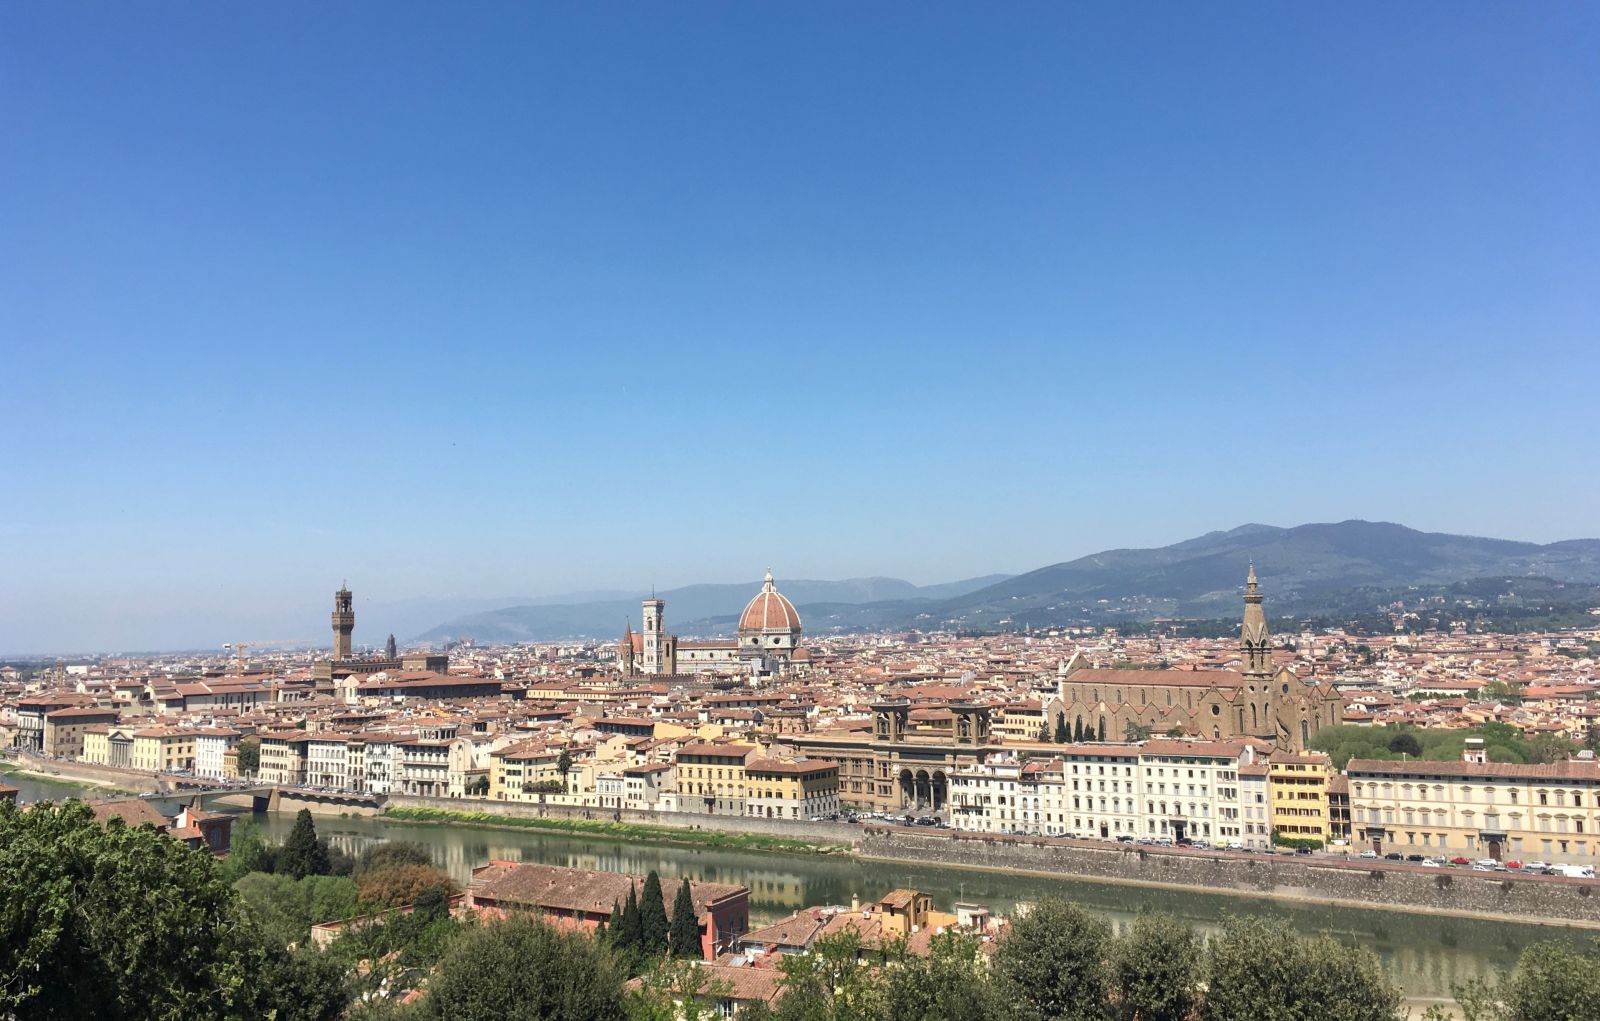 Landscape/cityscape view of Florence, featuring several densely packed modern and historic buildings. Wooded mountains line the background.